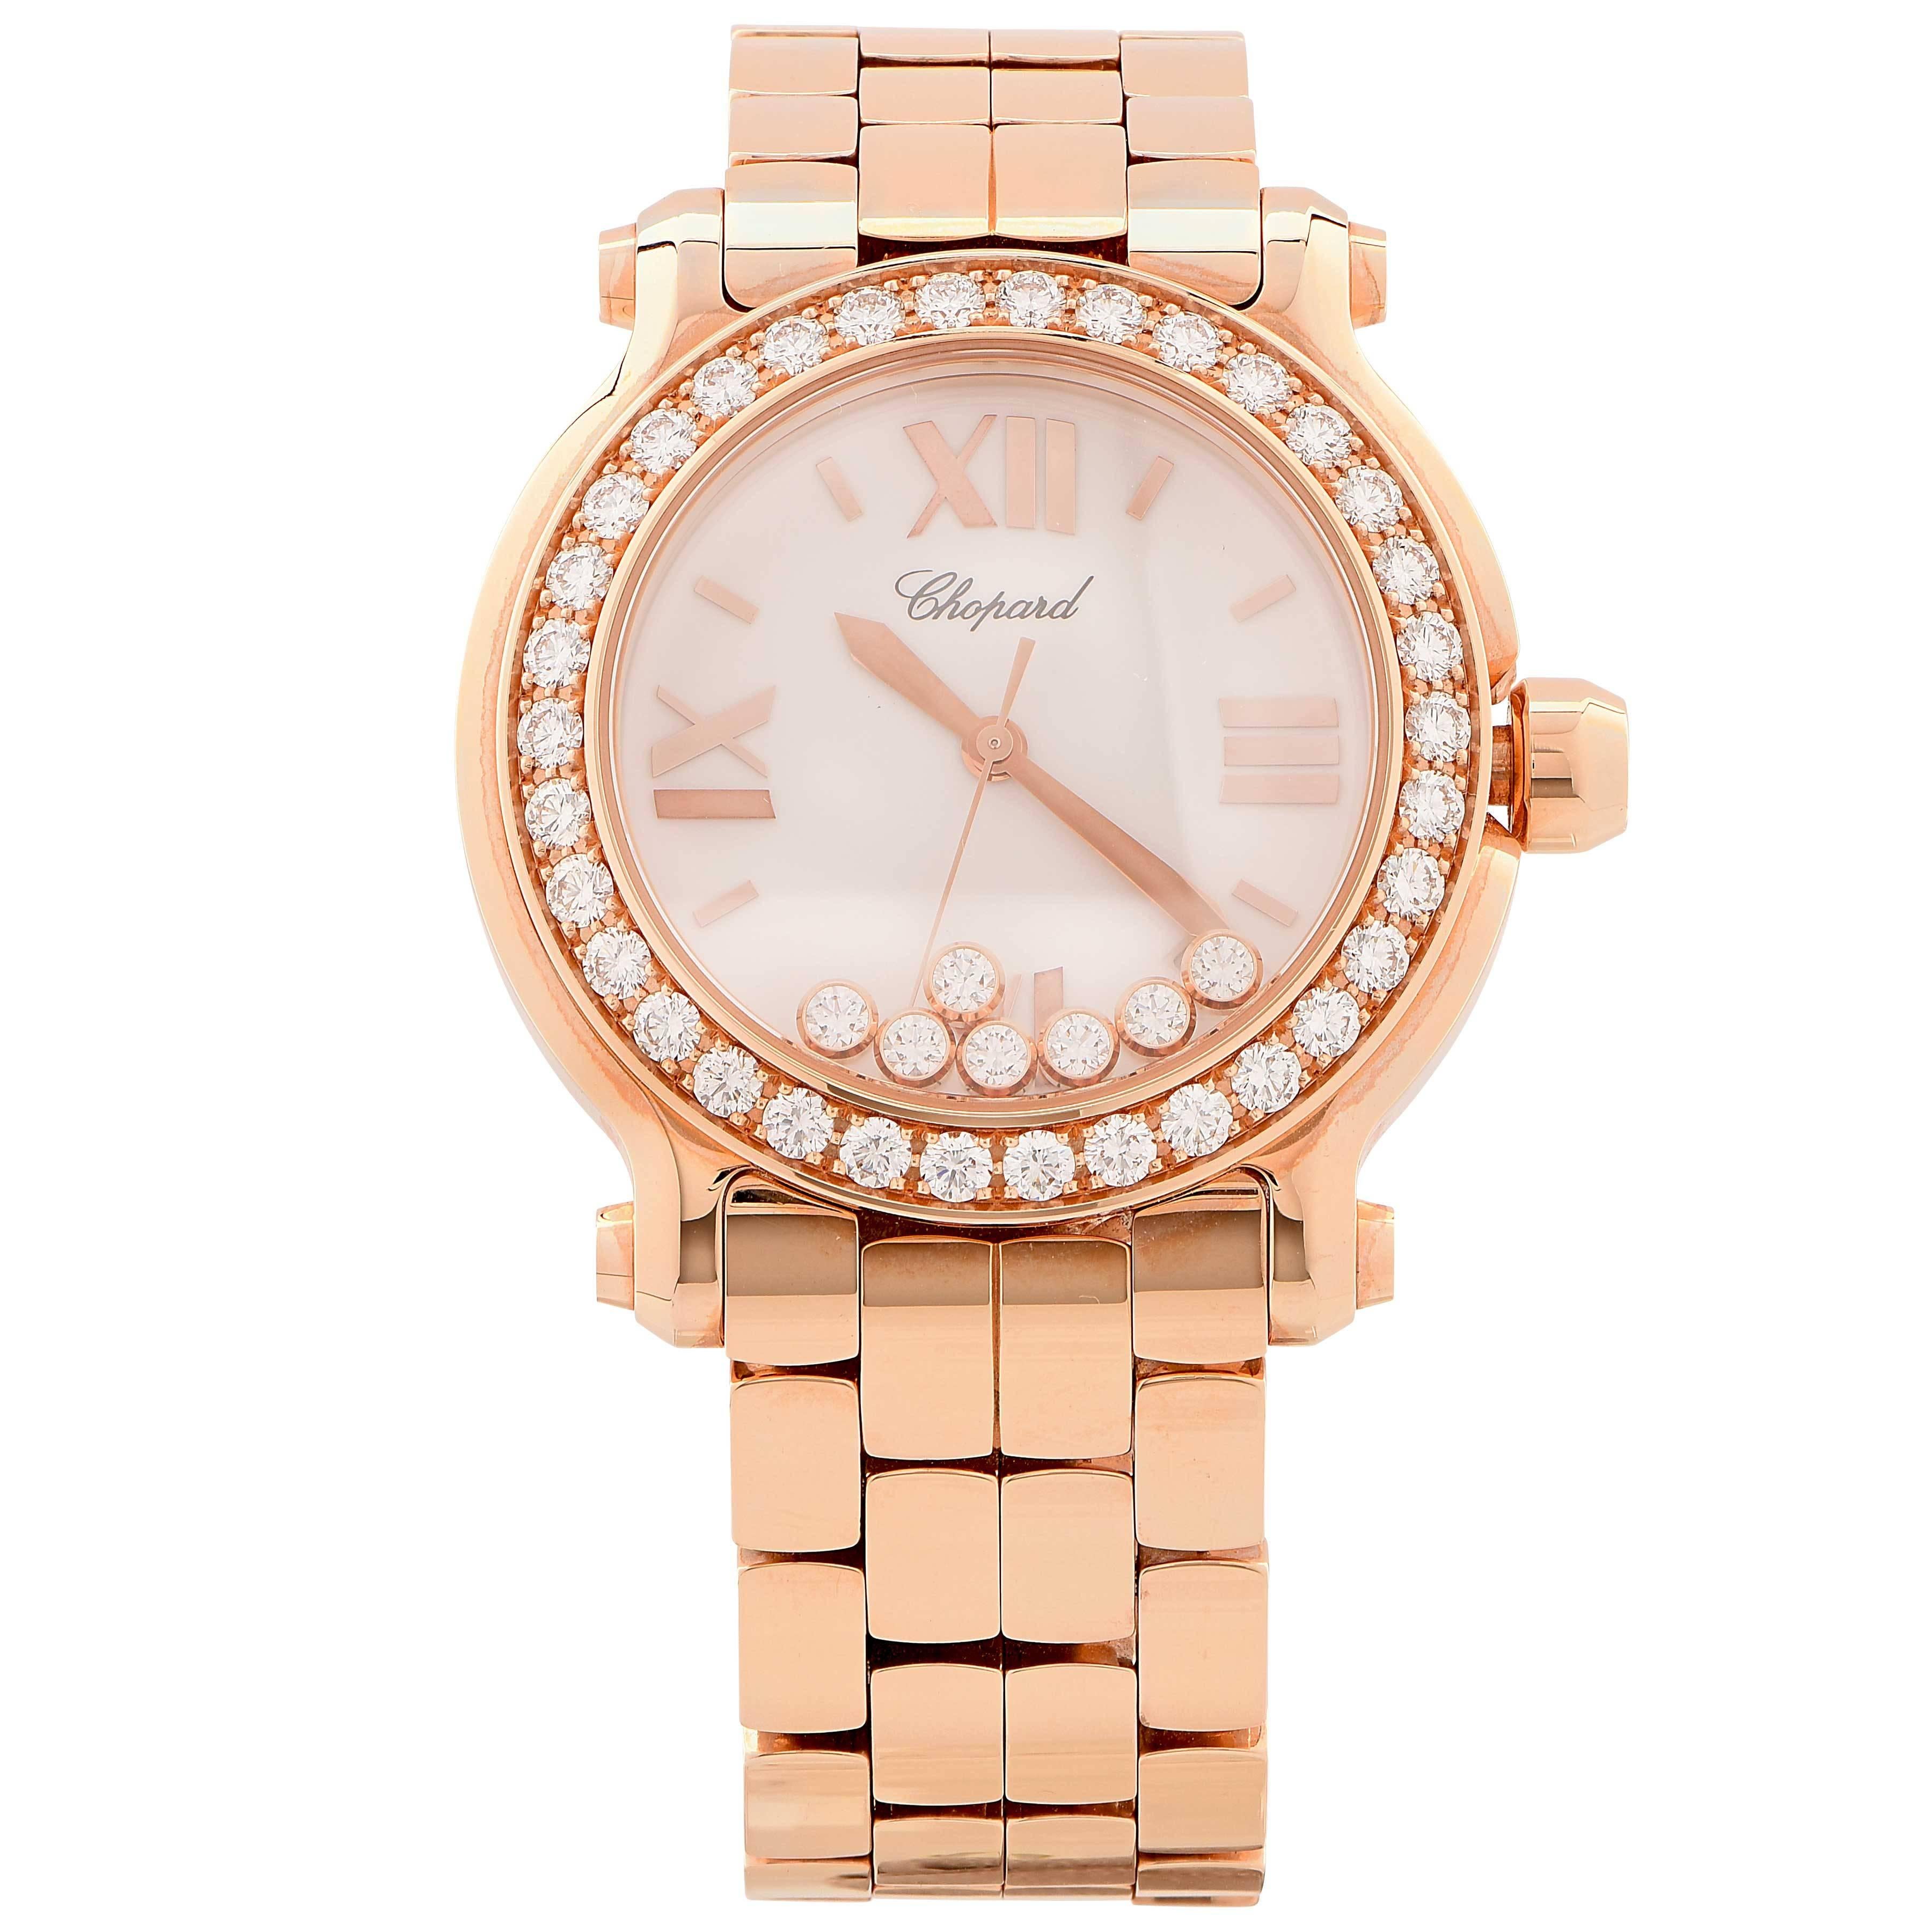 Brand new Chopard happy sport rose gold watch with 7 floating diamonds. Quartz movement, with second hand and date. With original Chopard box and papers. Retail price is $42,720.